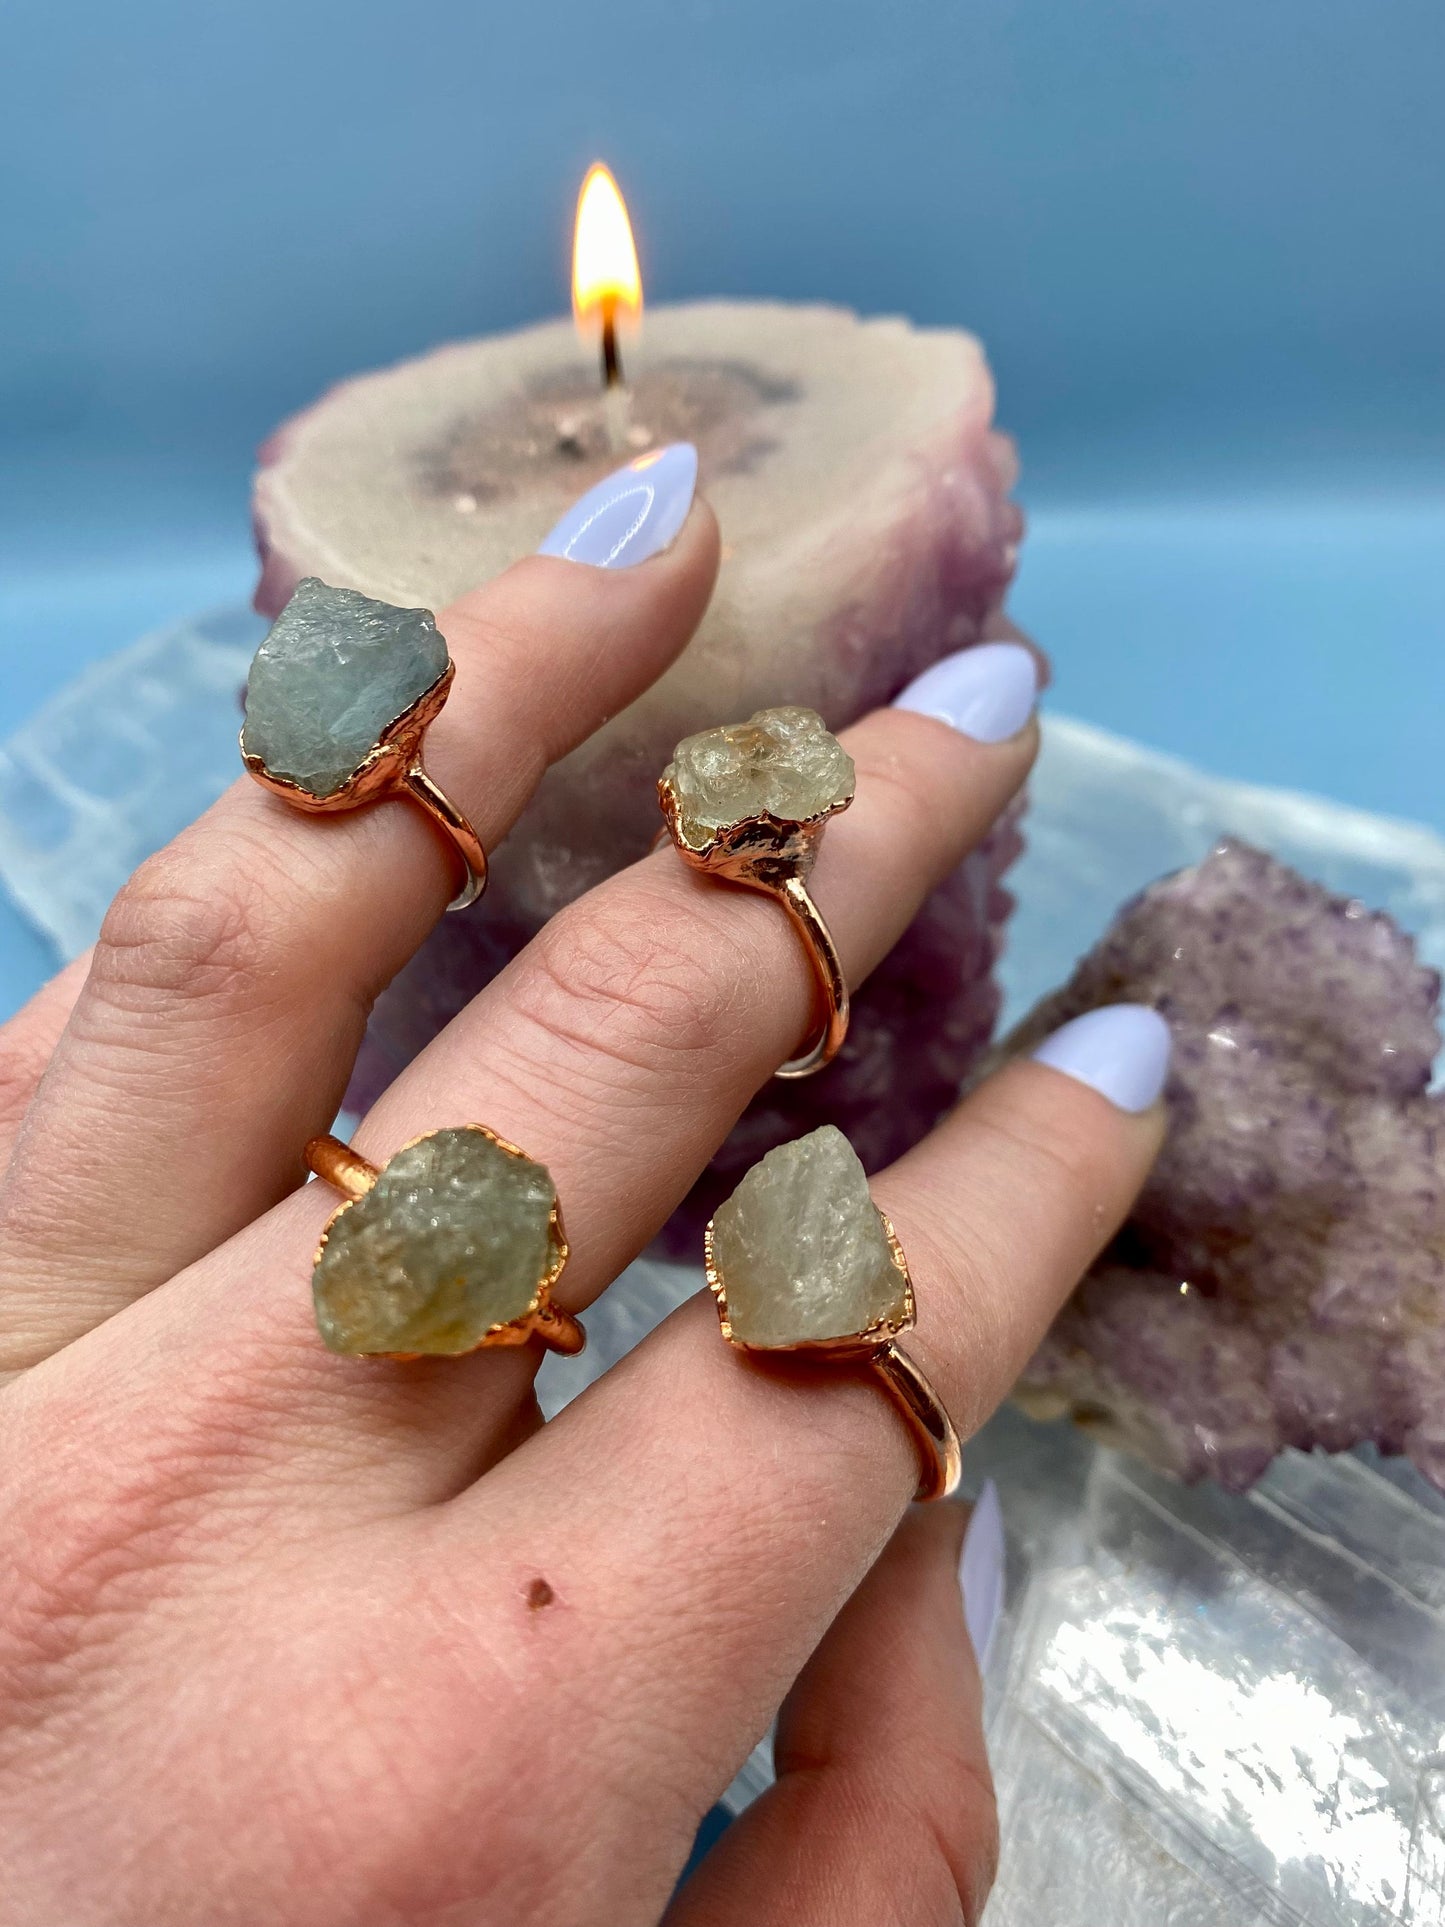 Aquamarine Crystal Ring Copper Electroformed in Rose Gold, March Birthstone Gemstone Jewelry Gift for Her